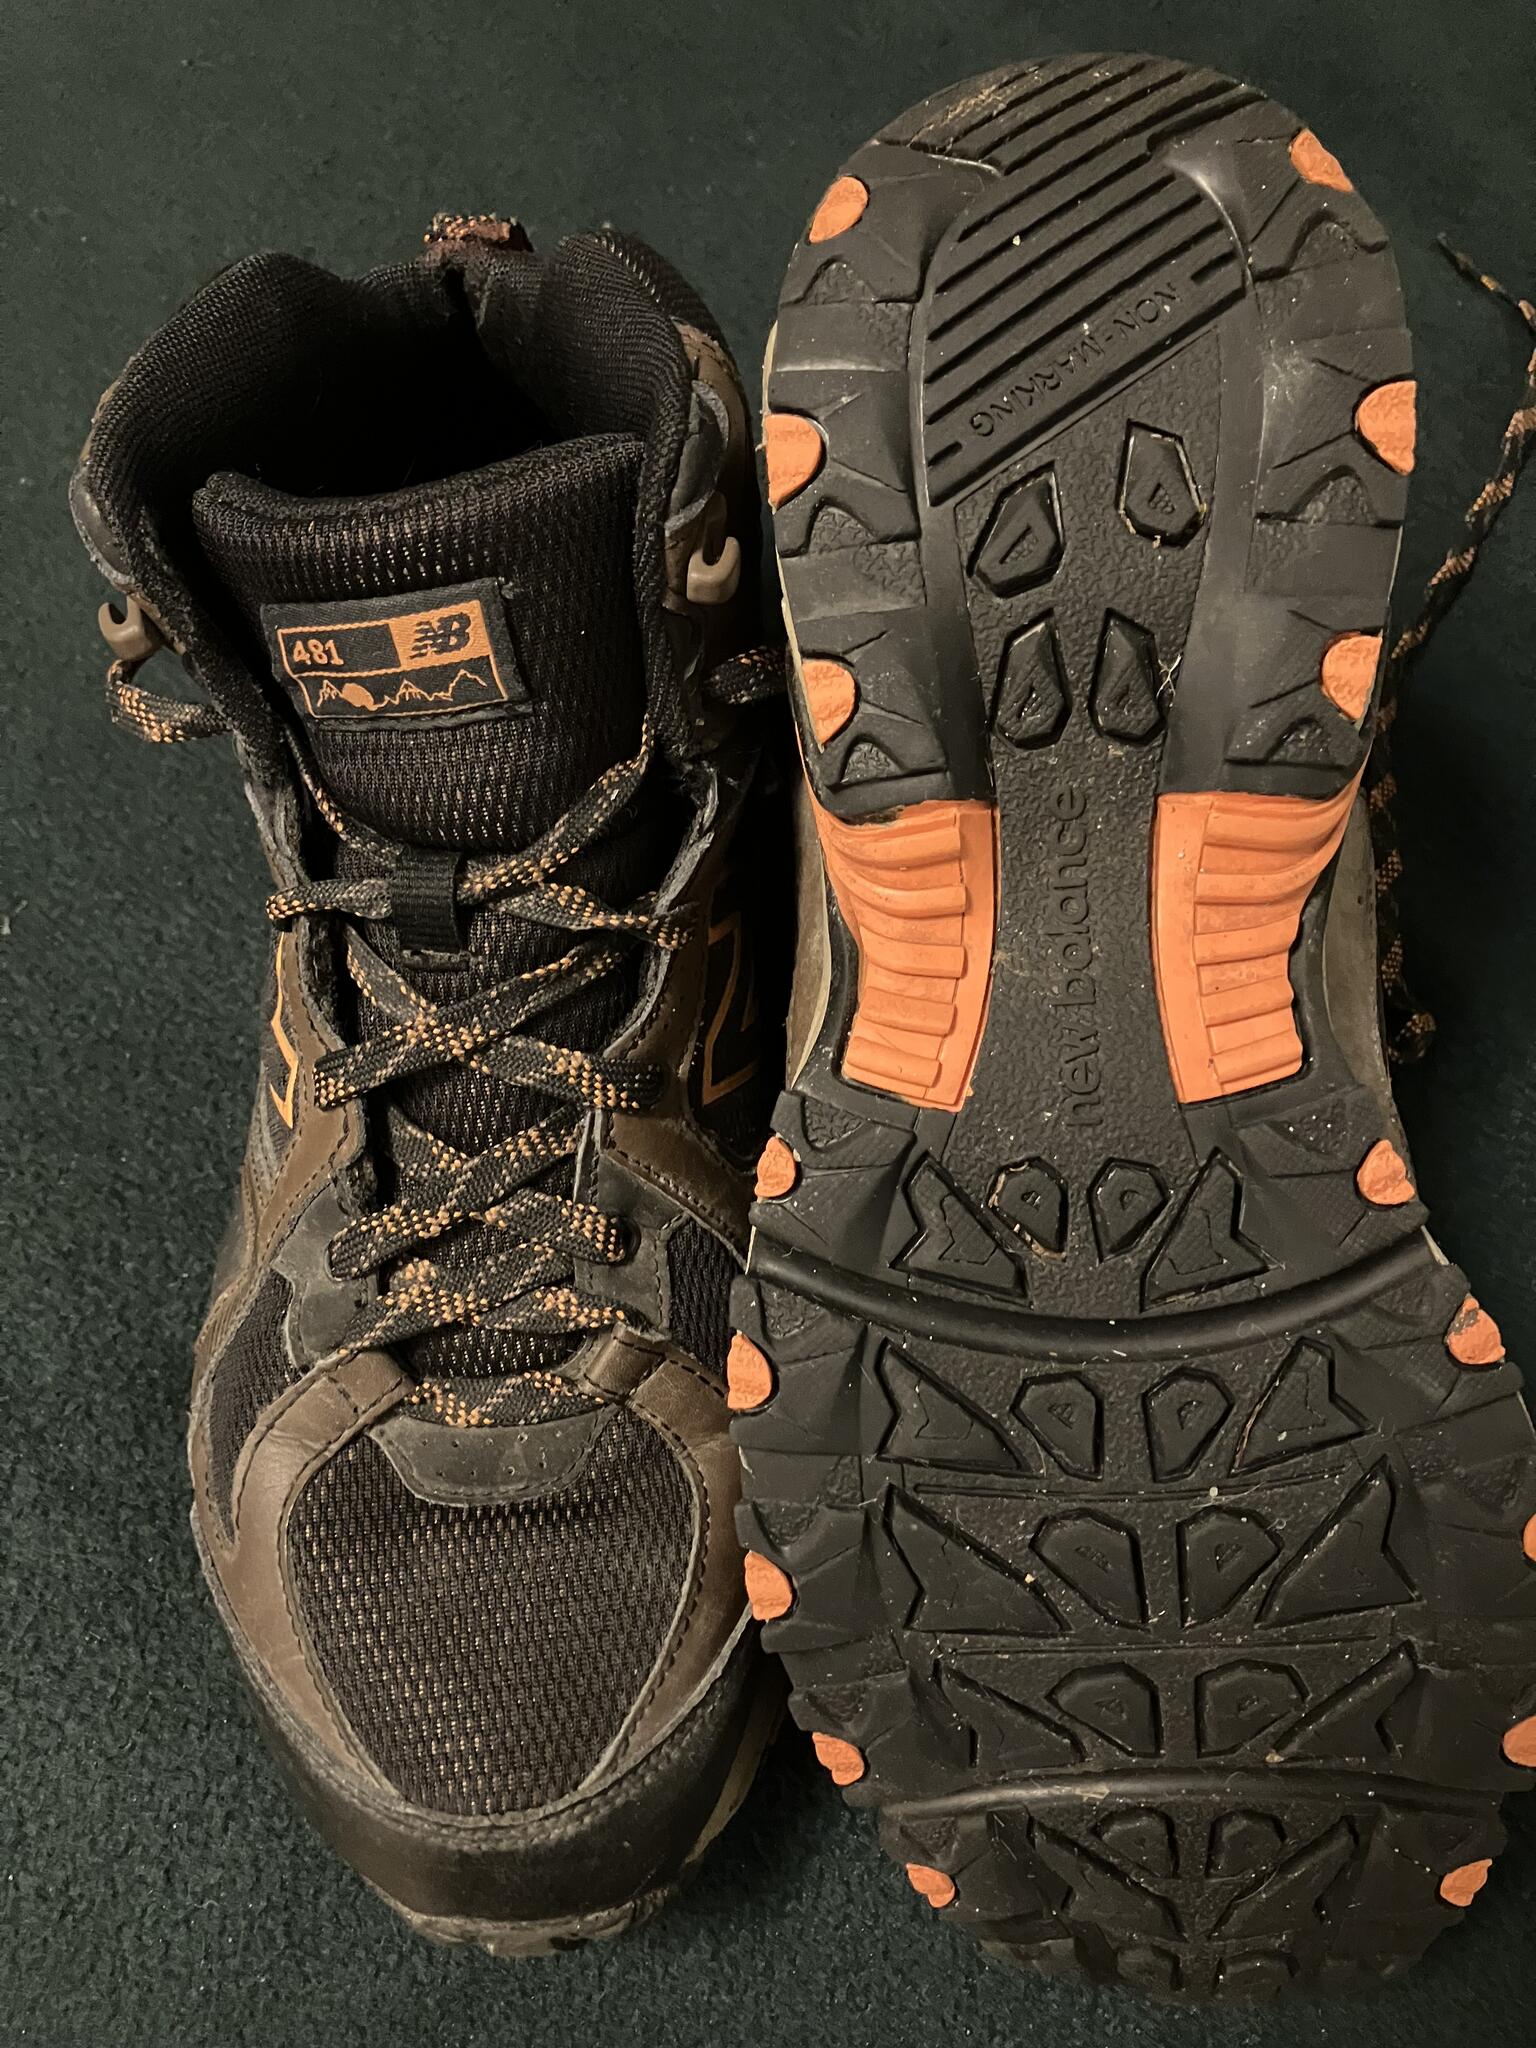 New Balance Men's Hiking Boots For $25 In South Portl&, ME